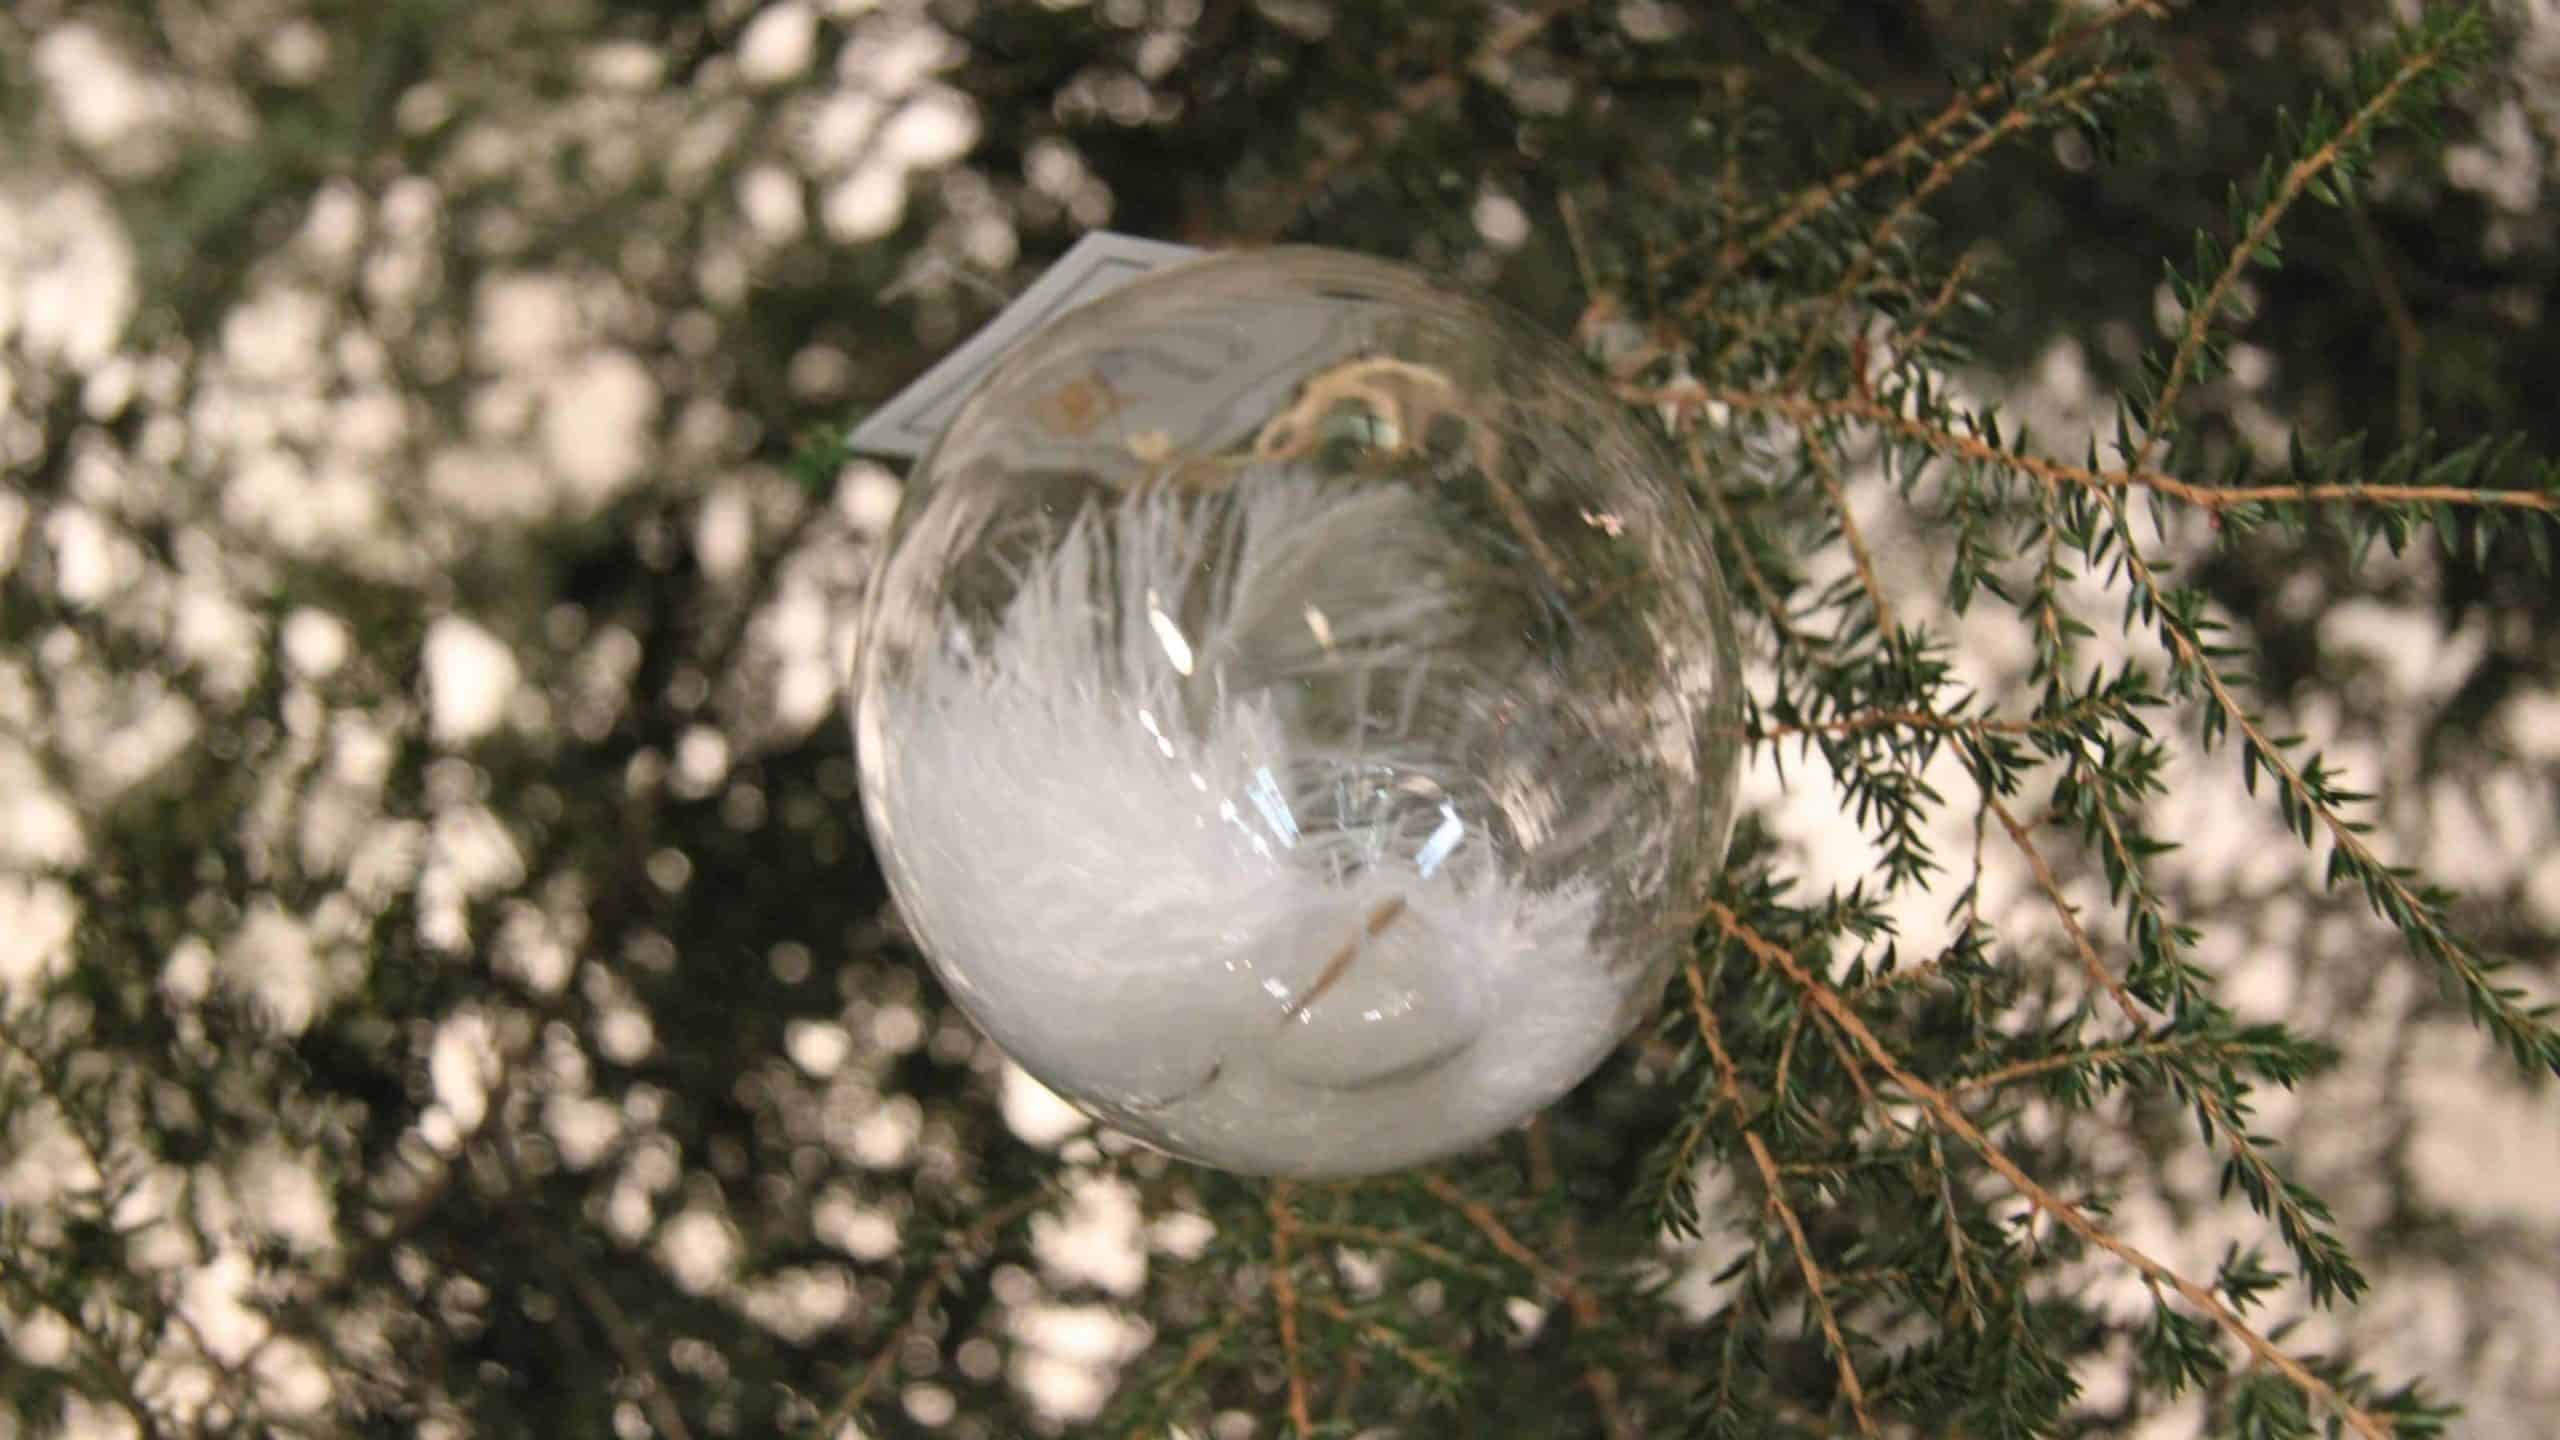 A winter holiday ornament catches the light.